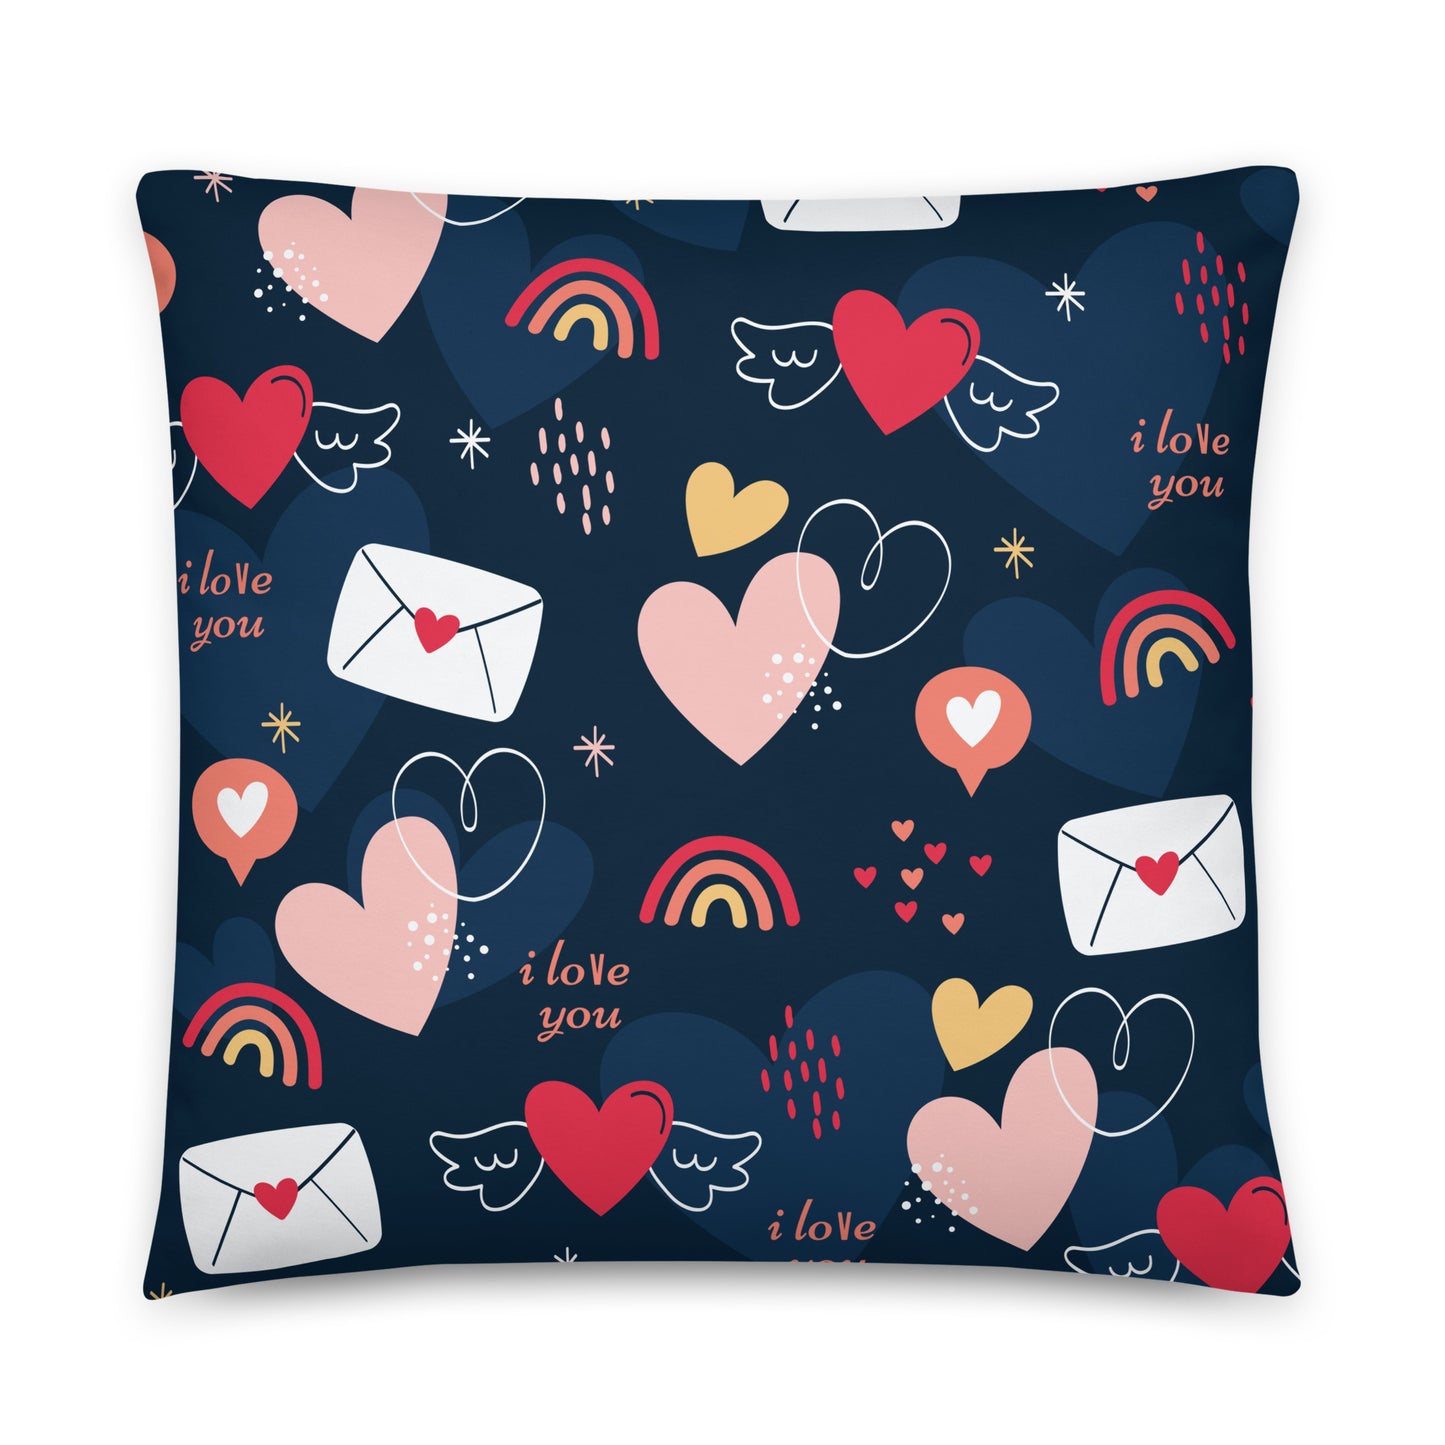 Love Letter - Sustainably Made Pillows